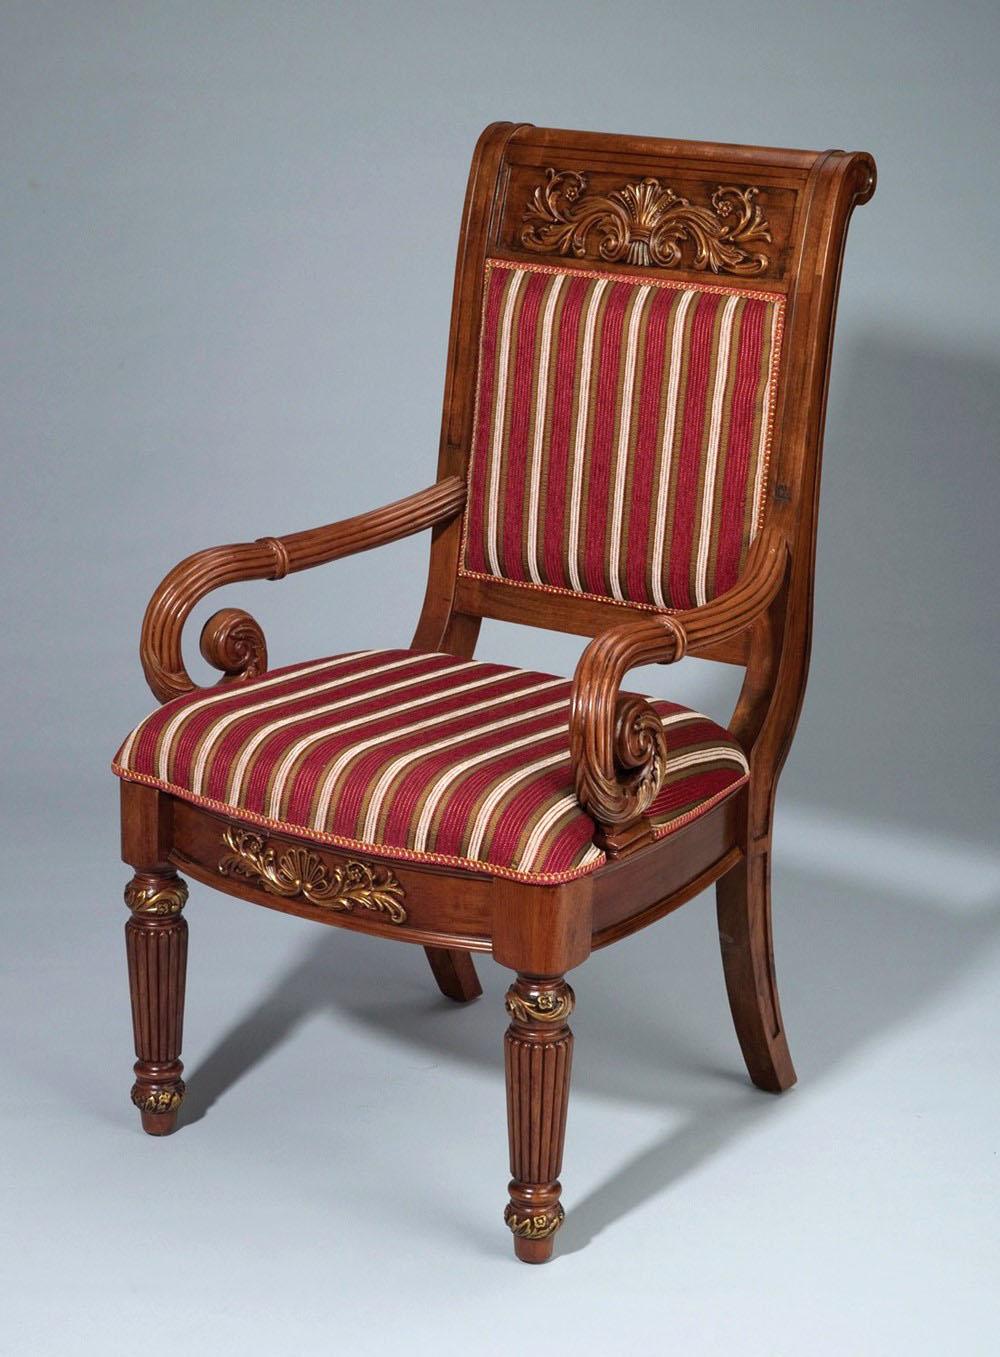 Classic, Traditional Arm Chairs 38621 AA-38621-ACH-Set-2 in Dark Brown, Multi-Color Patterned Fabric